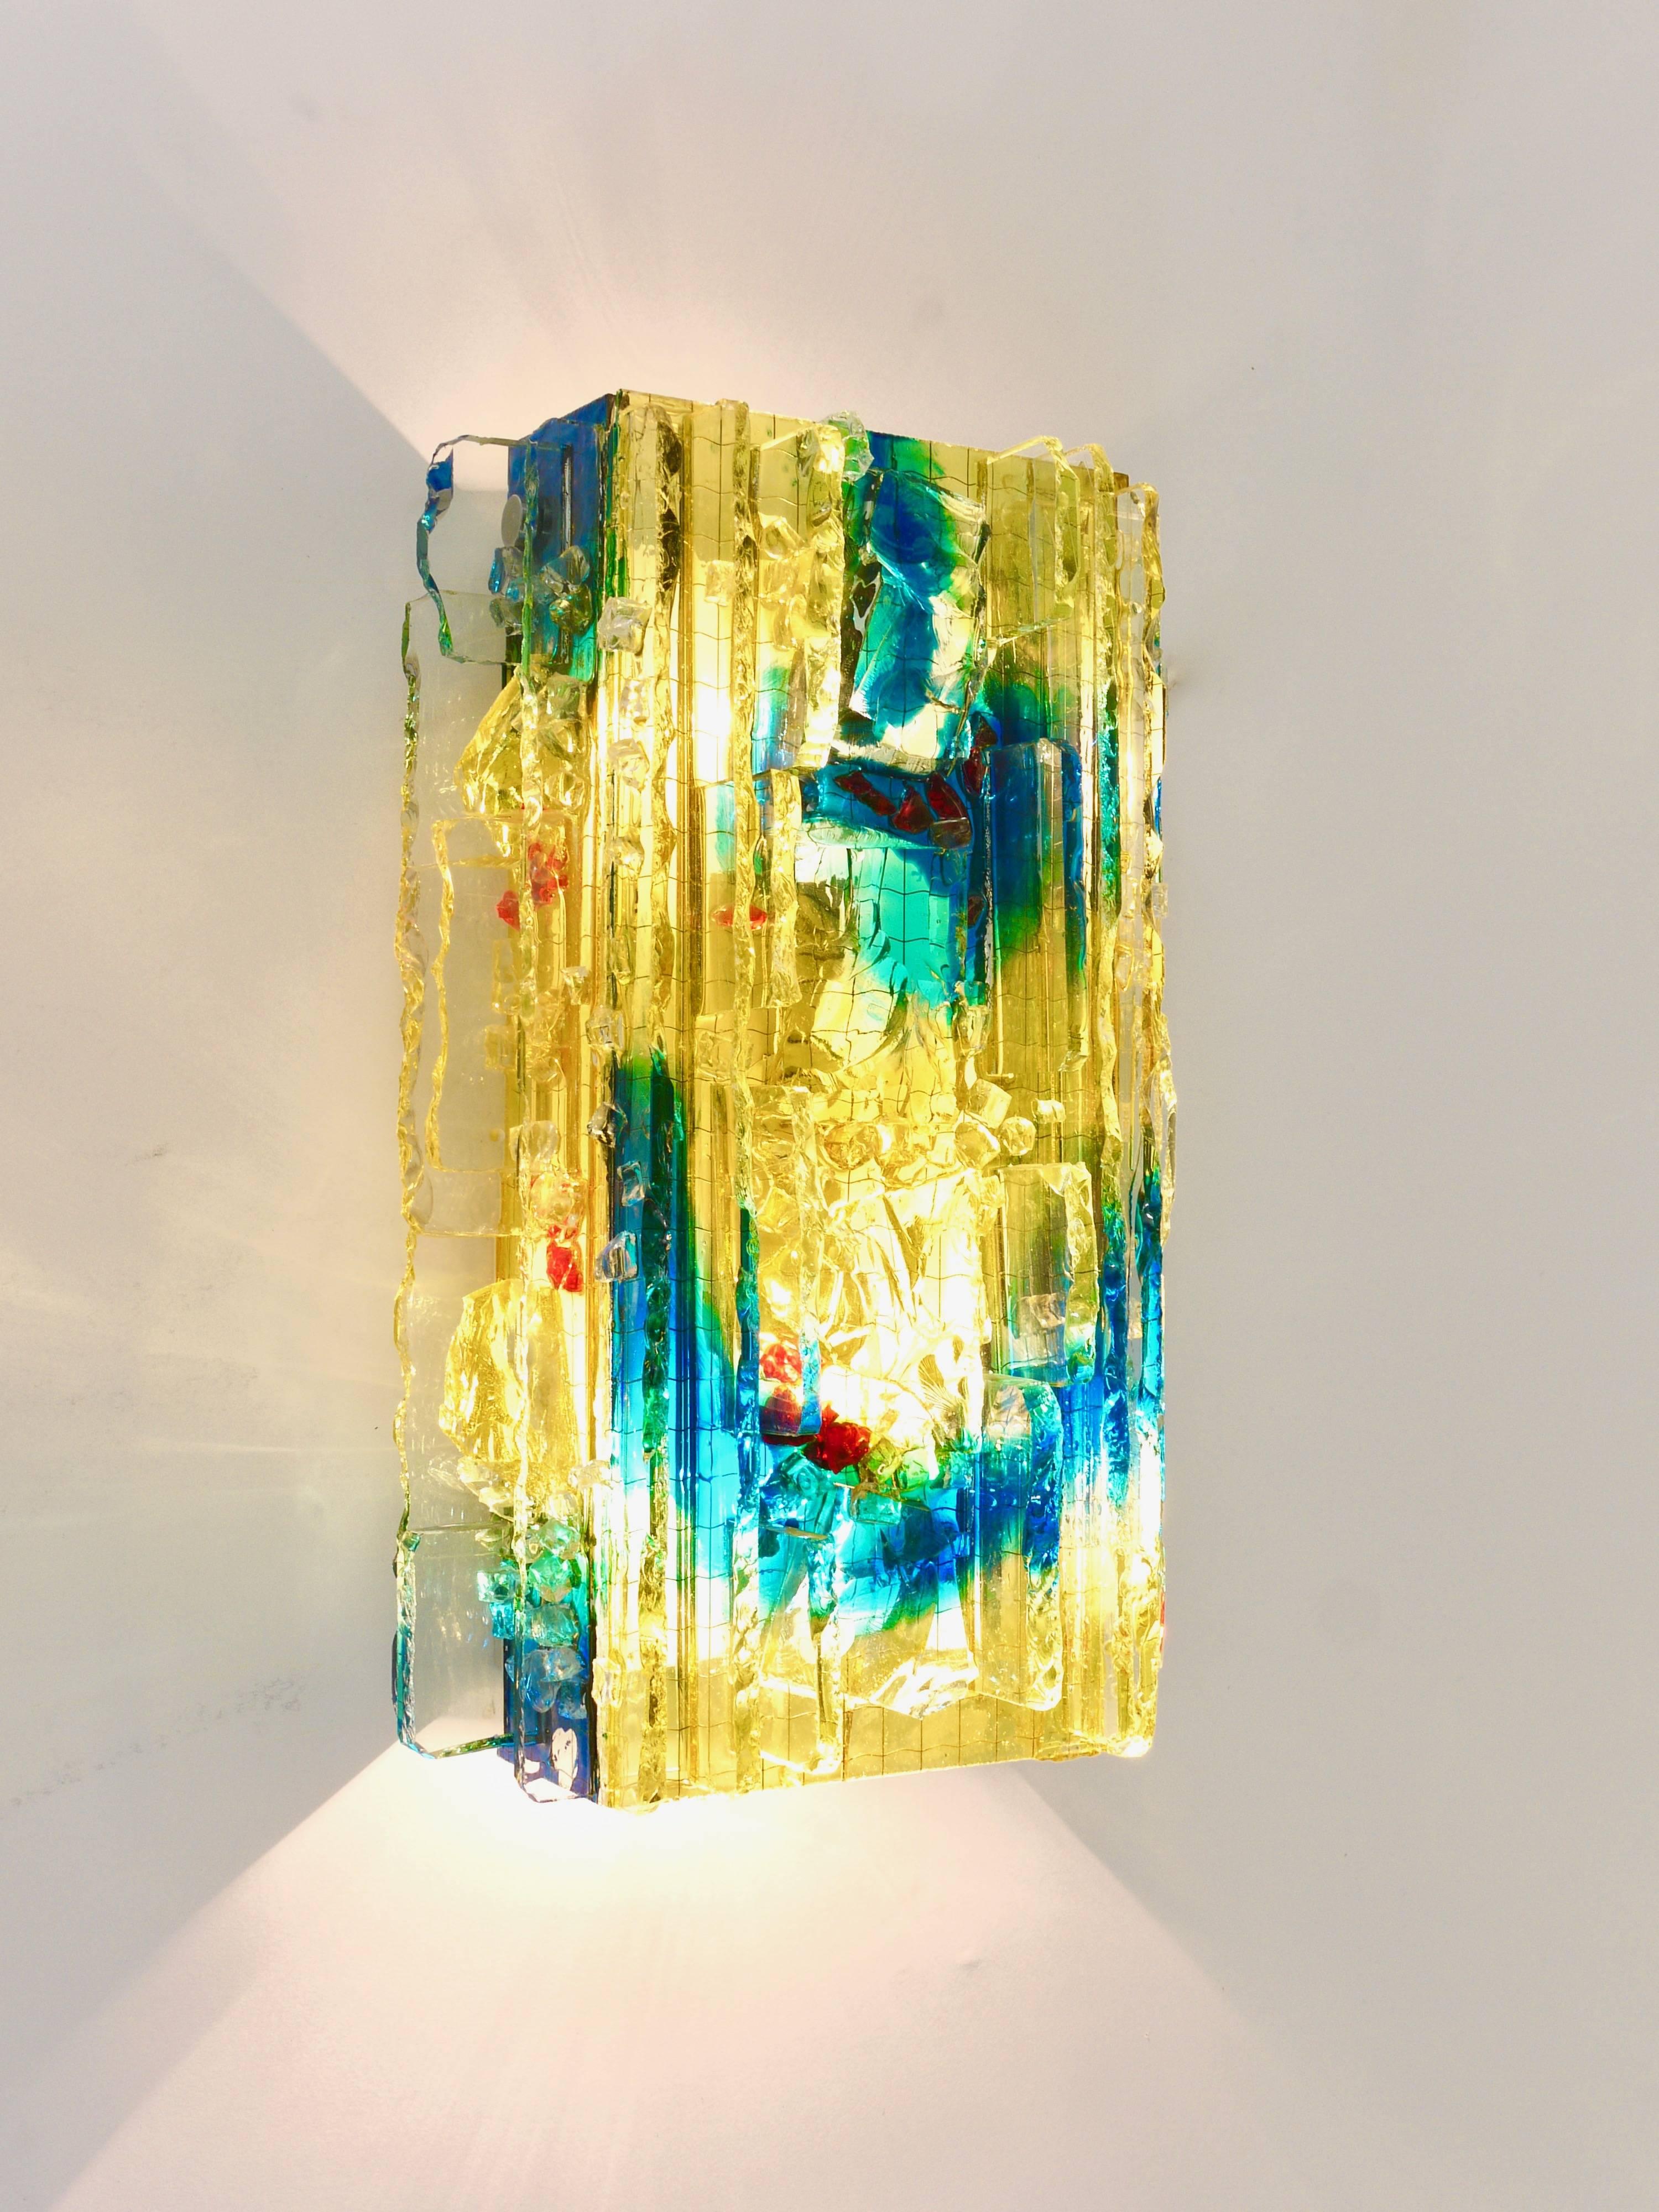 A beautiful pair of colorful Art glass wall lights from the 1960s, designed by A. Lankhorst, executed RAAK Amsterdam. Stunning lights, consisting of handmade, square multi-colored glass collage lampshades, on a white metal base, each light offers